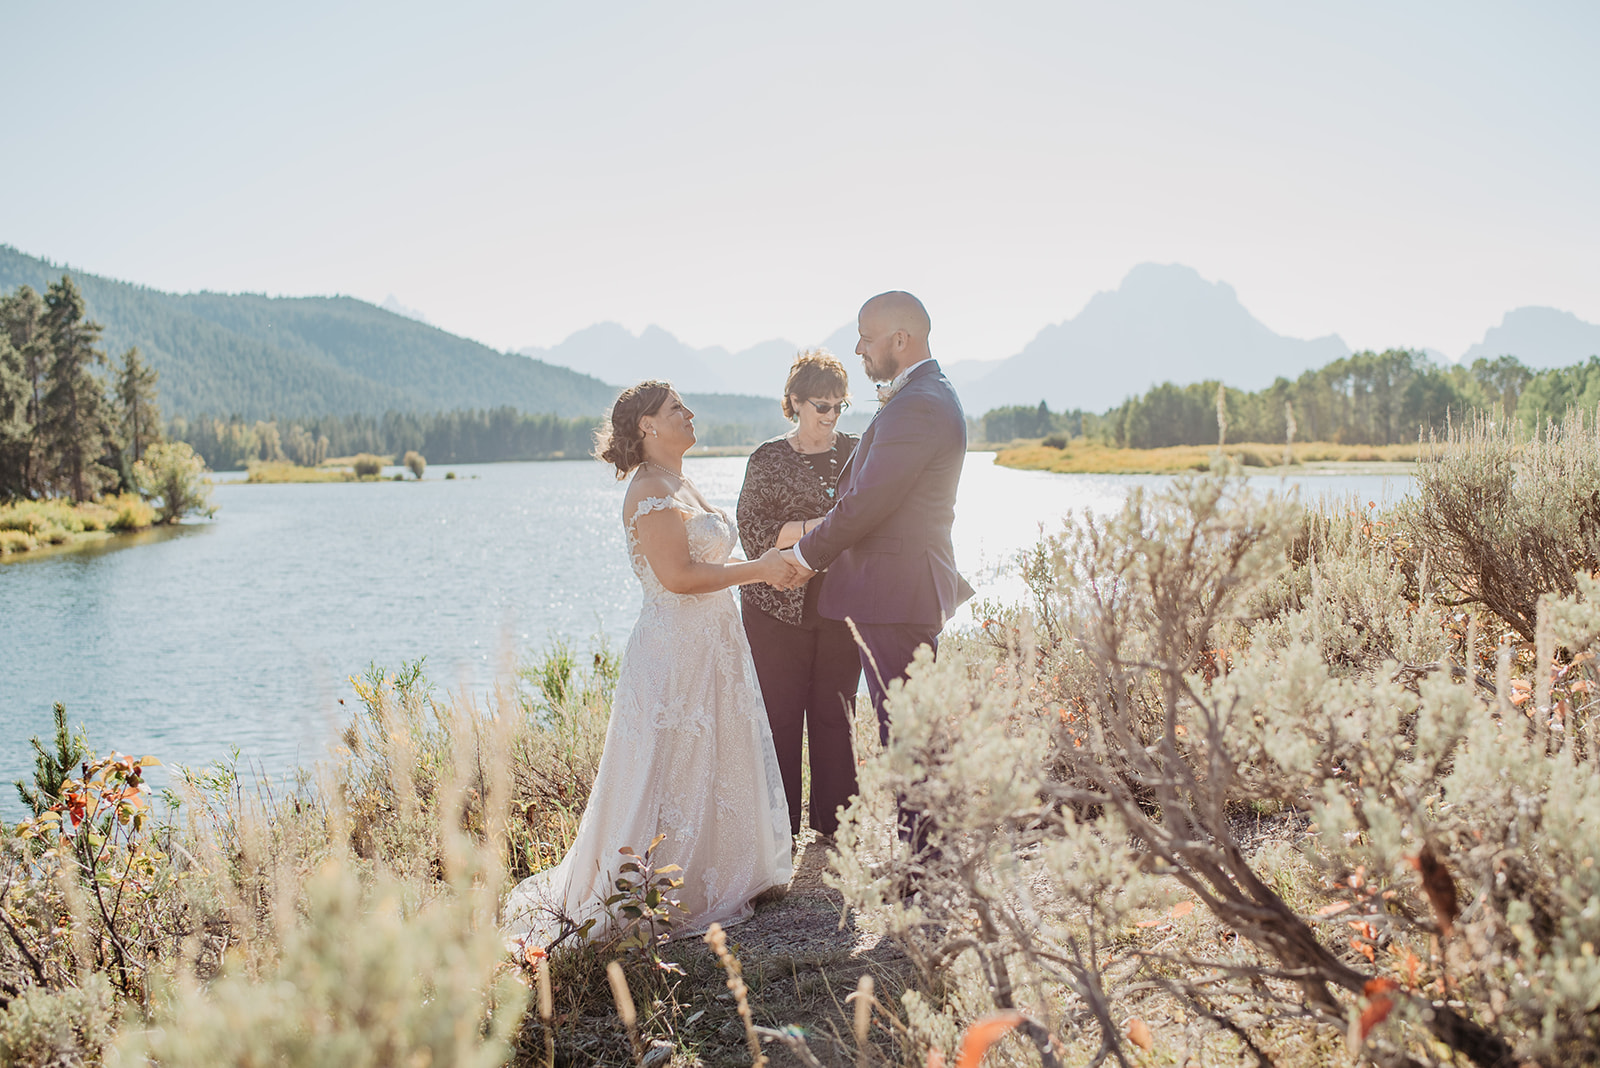 Onbow Bend Elopement ceremony next to Snake River in the Jackson Hole with the Tetons in the background as the bride and groom hold hands and are married by their wedding officiant